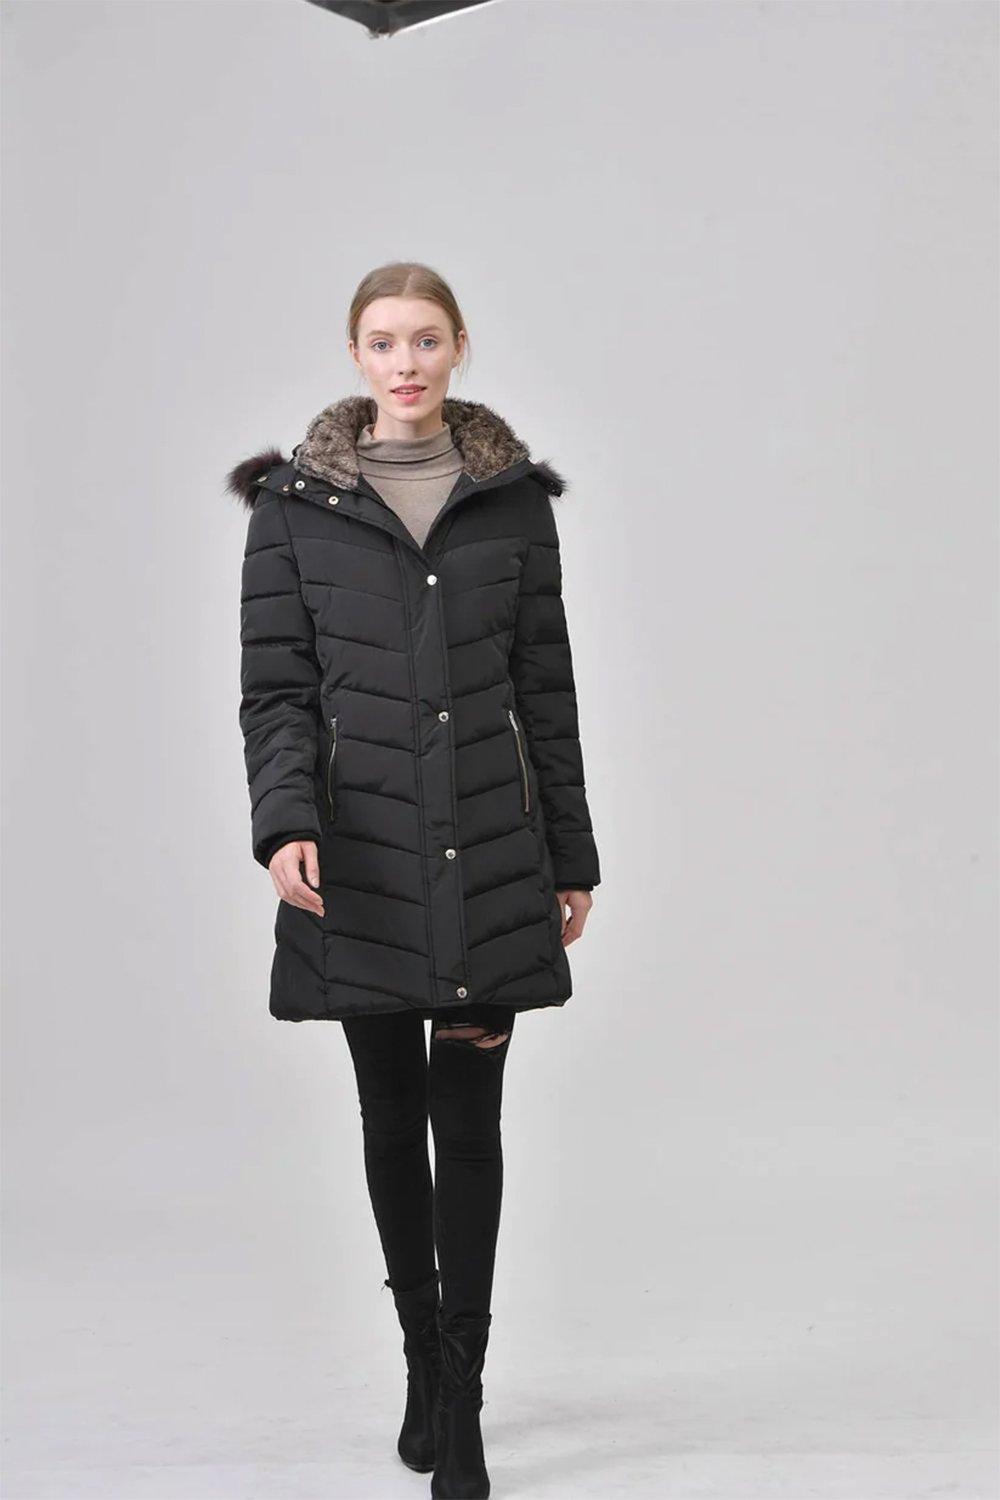 Hollister Hollister Faux Fur-Lined All-Weather Winter Jacket 120.00